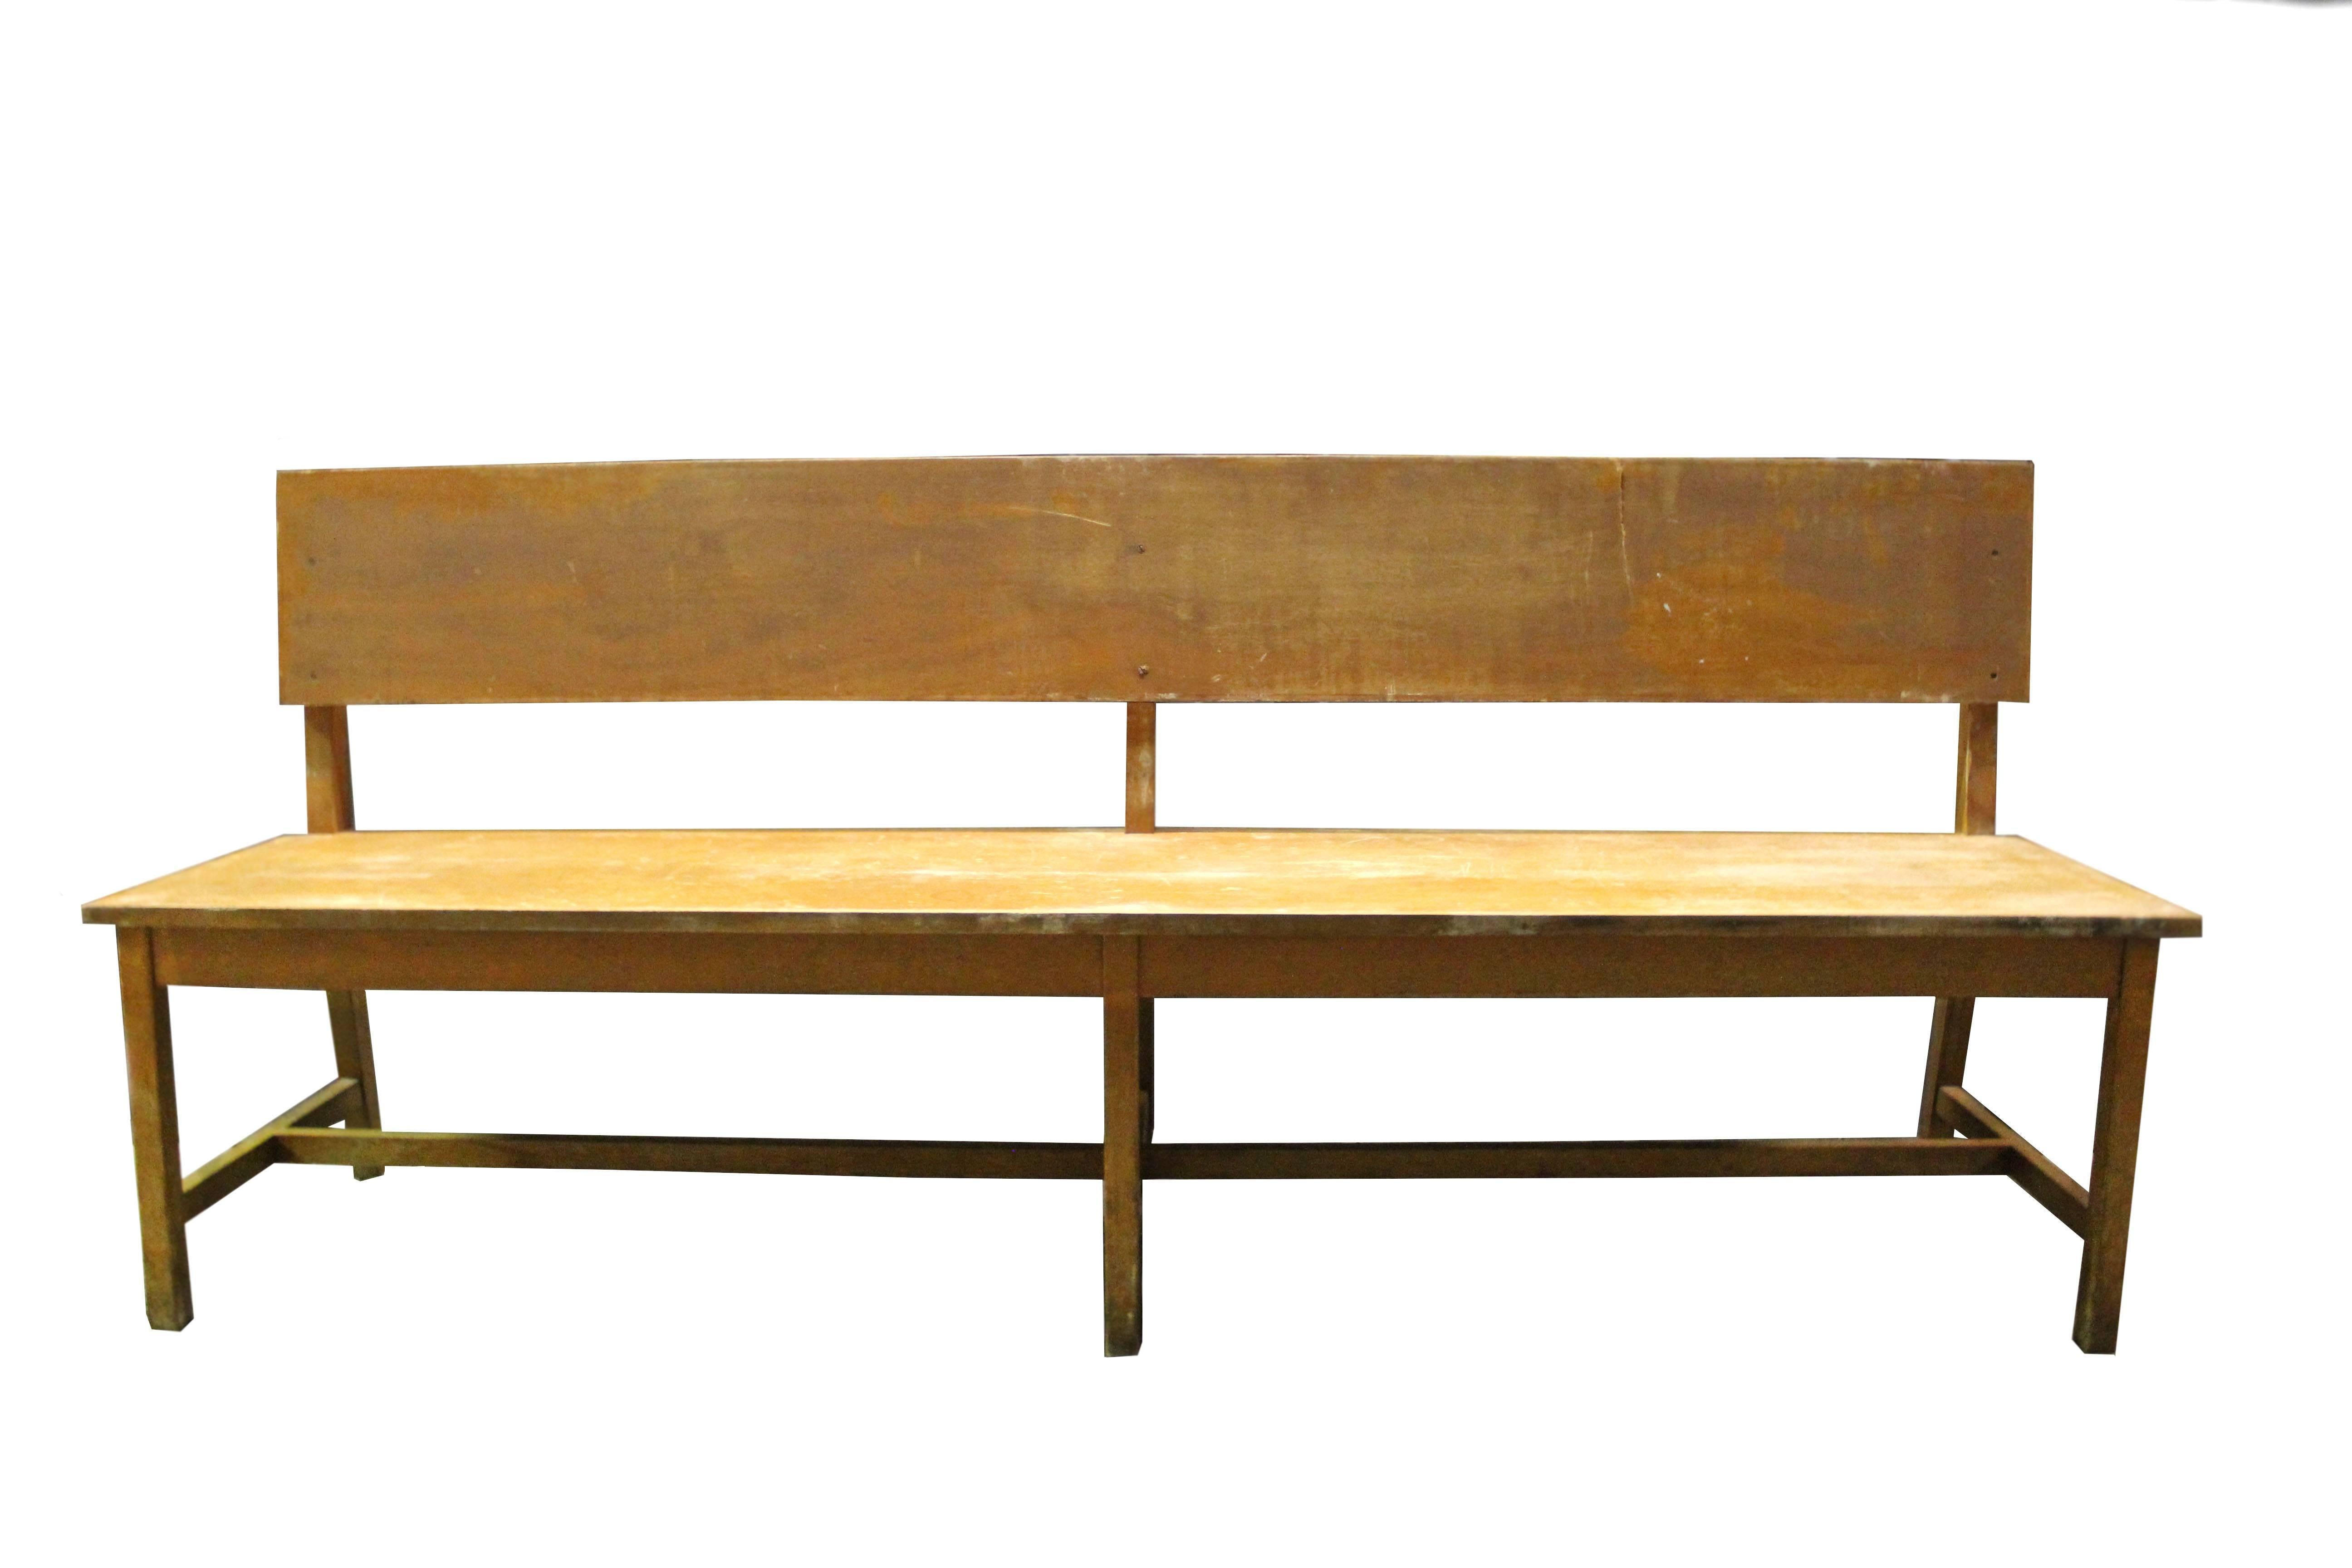 Set of six 79 inch long wooden benches from Israel.  Will sell as a pair or as a set of 3 or more. 